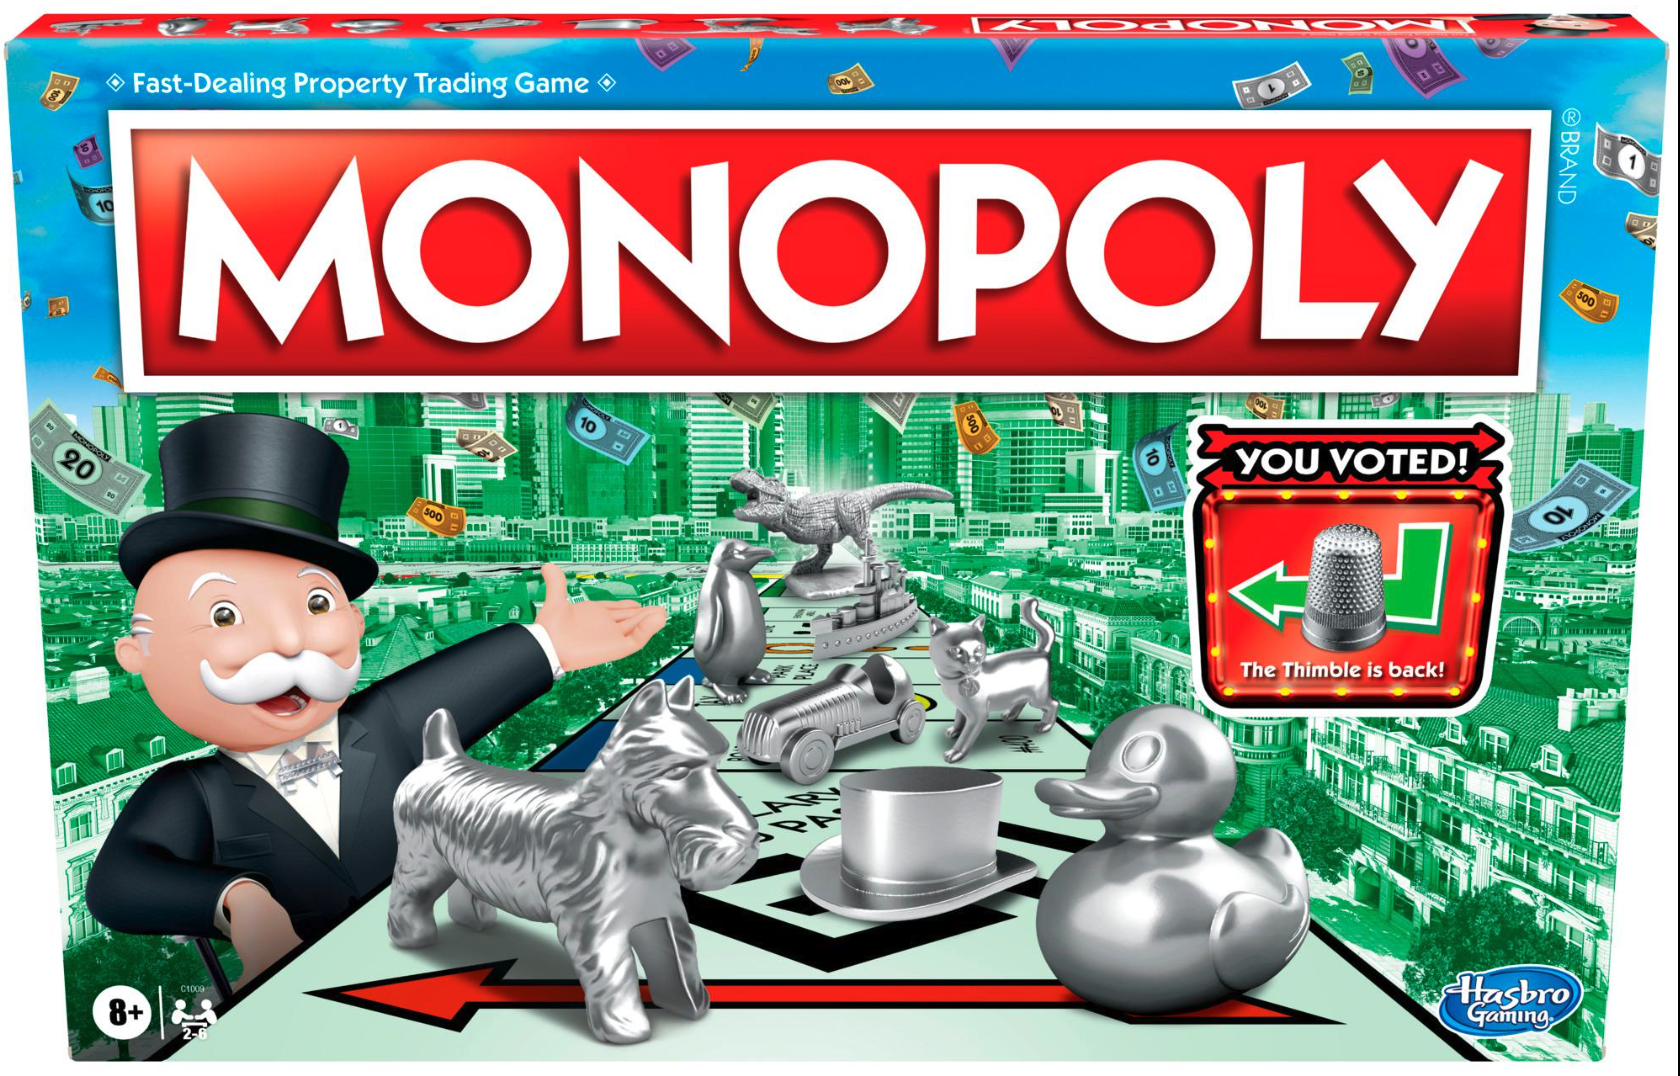 What do FTX and Monopoly Have in Common?